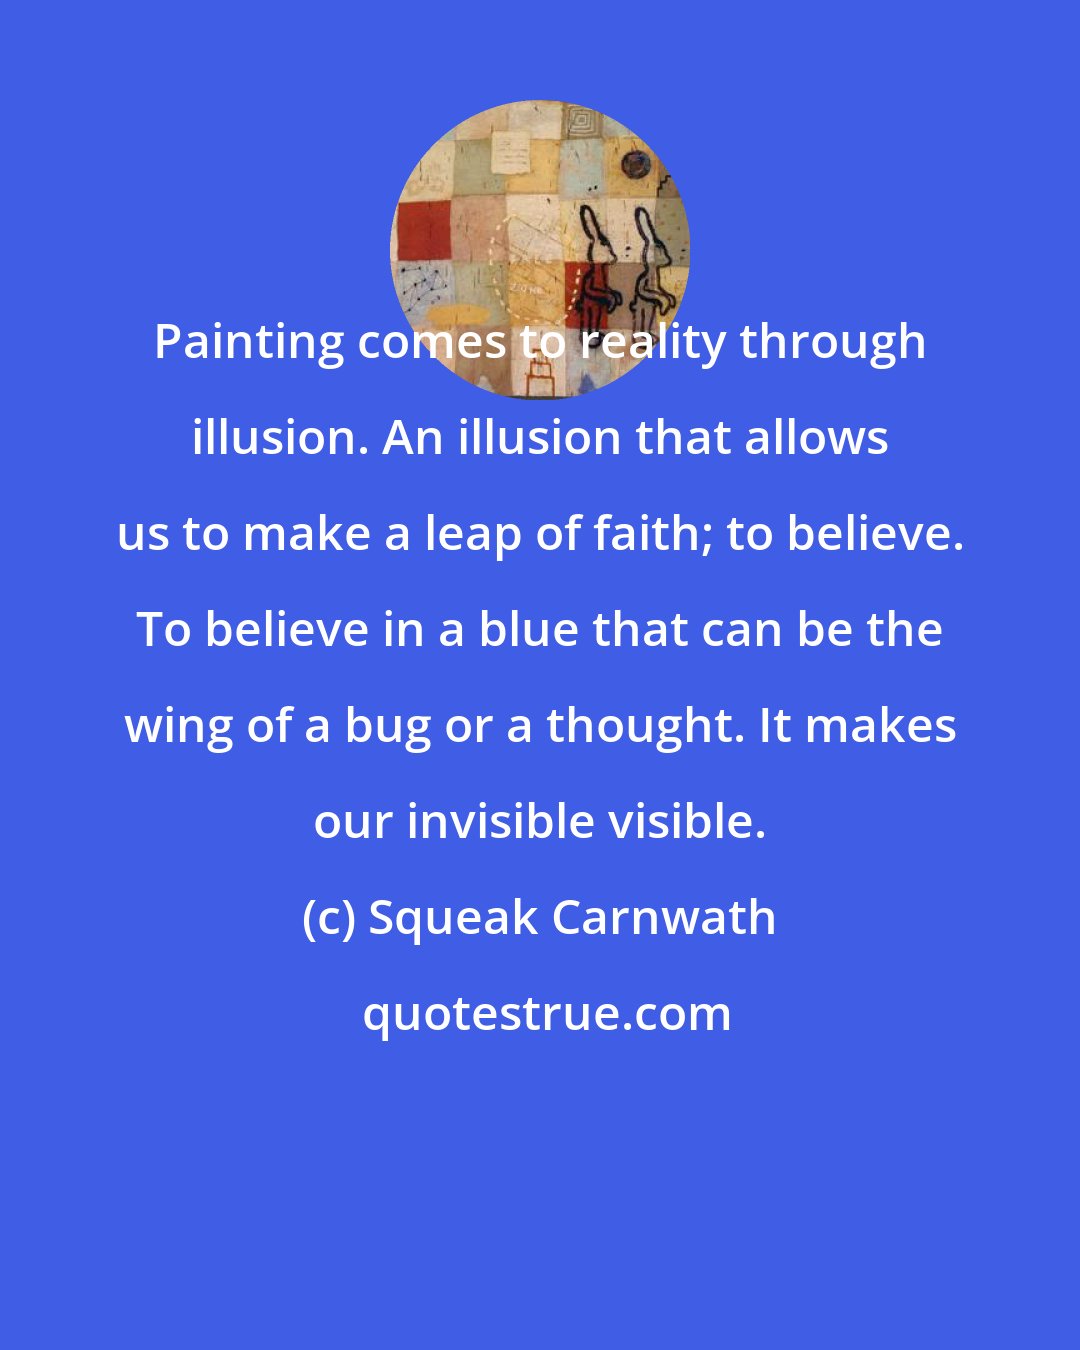 Squeak Carnwath: Painting comes to reality through illusion. An illusion that allows us to make a leap of faith; to believe. To believe in a blue that can be the wing of a bug or a thought. It makes our invisible visible.